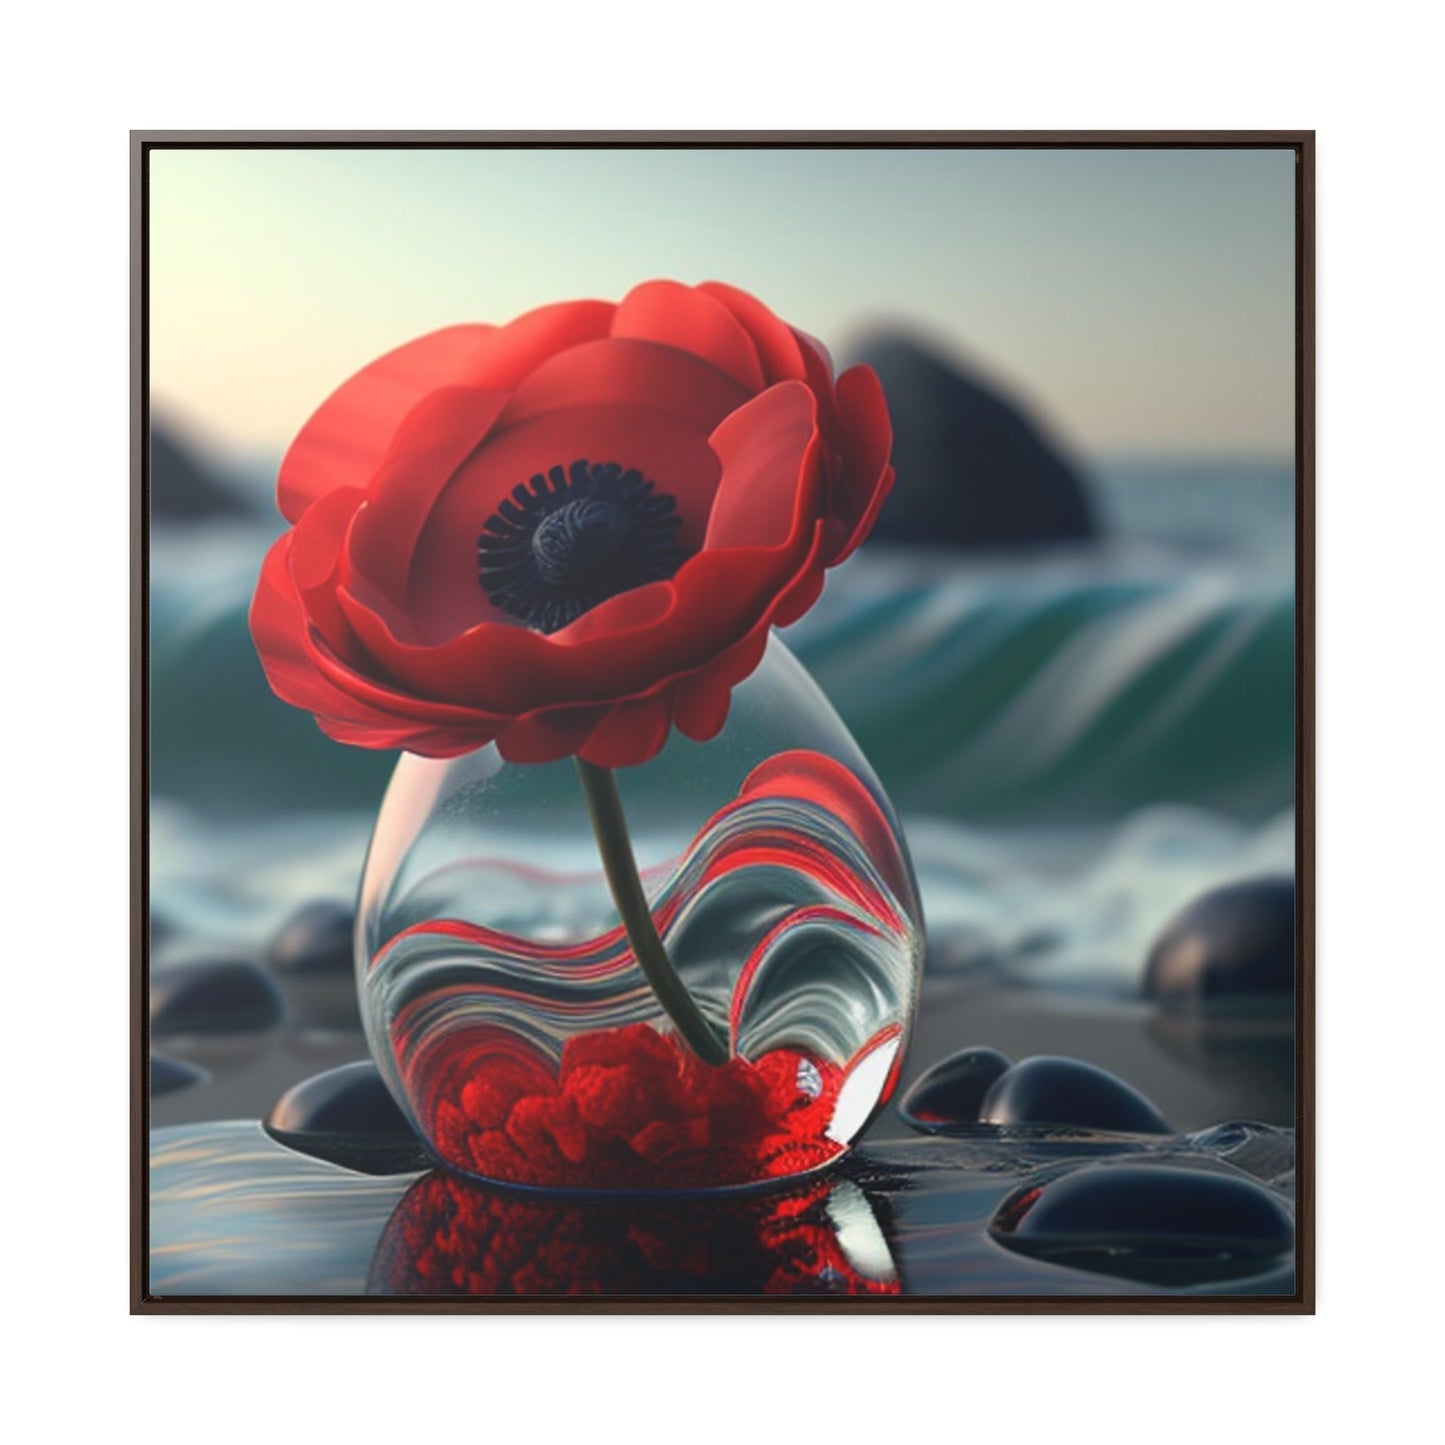 Gallery Canvas Wraps, Square Frame Red Anemone in a Vase 1